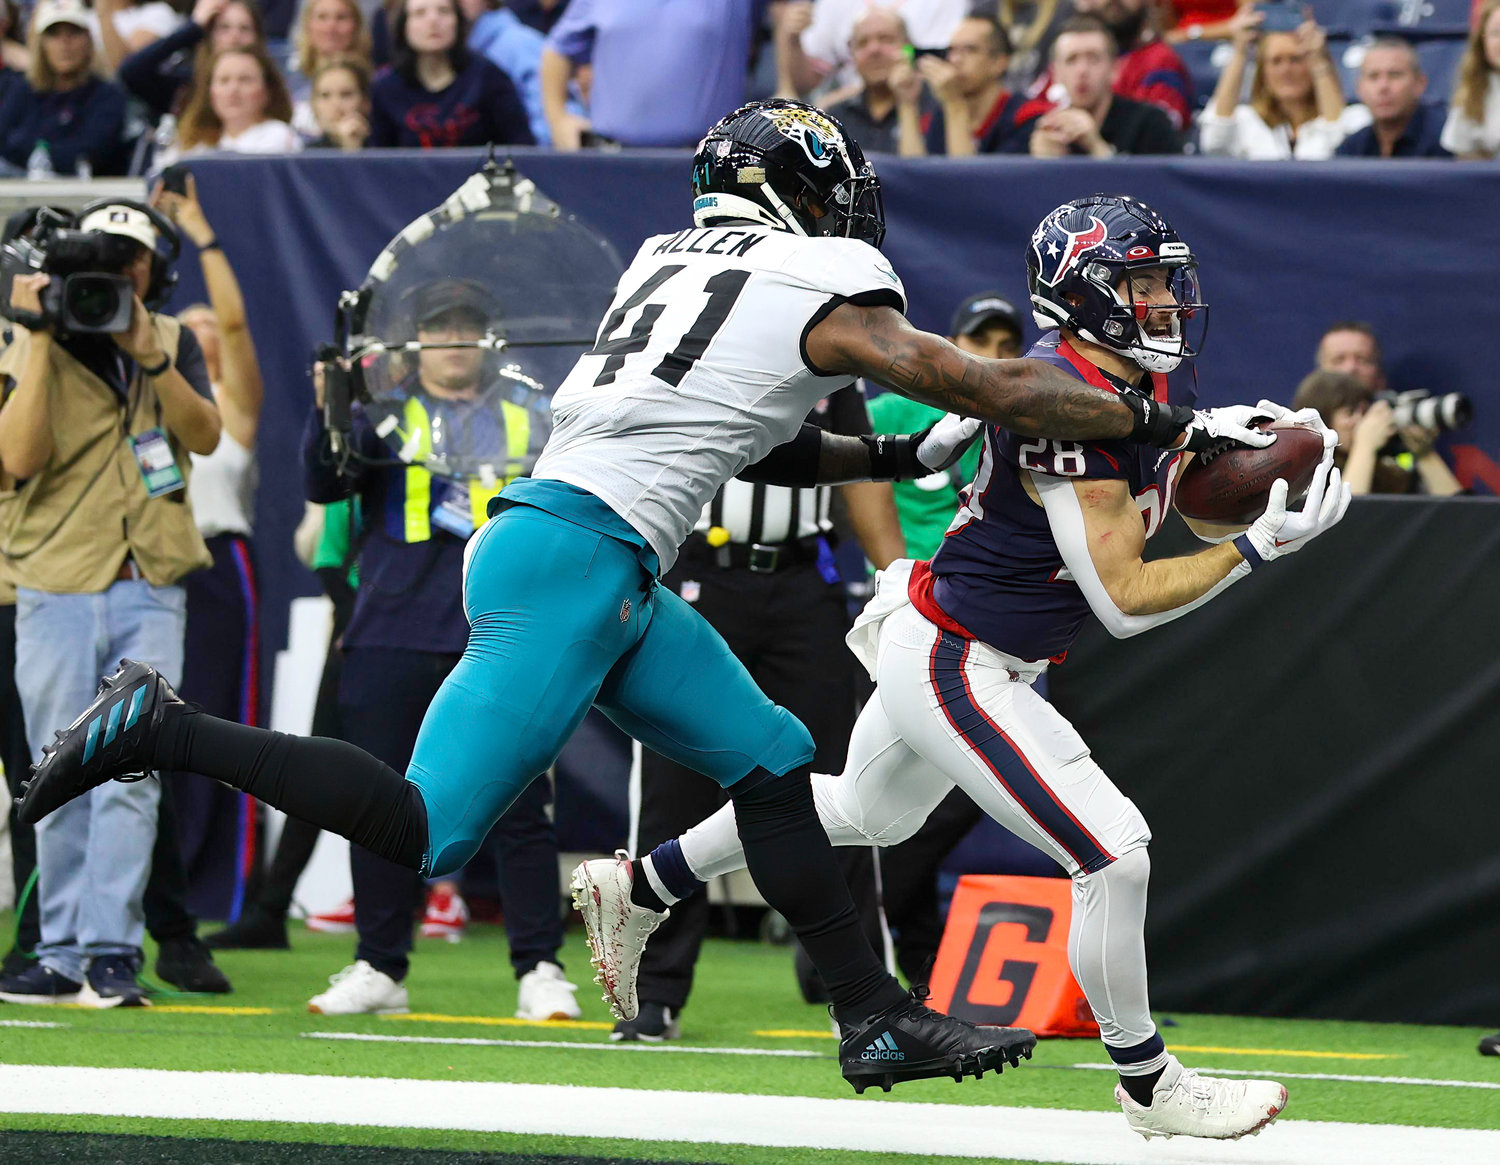 Jaguars linebacker Josh Allen (41) dislodges a would-be touchdown pass intended for Texans running back Rex Burkhead (28) during an NFL game between the Houston Texans and the Jacksonville Jaguars on Jan. 1, 2023 in Houston. The Jaguars won, 31-3.